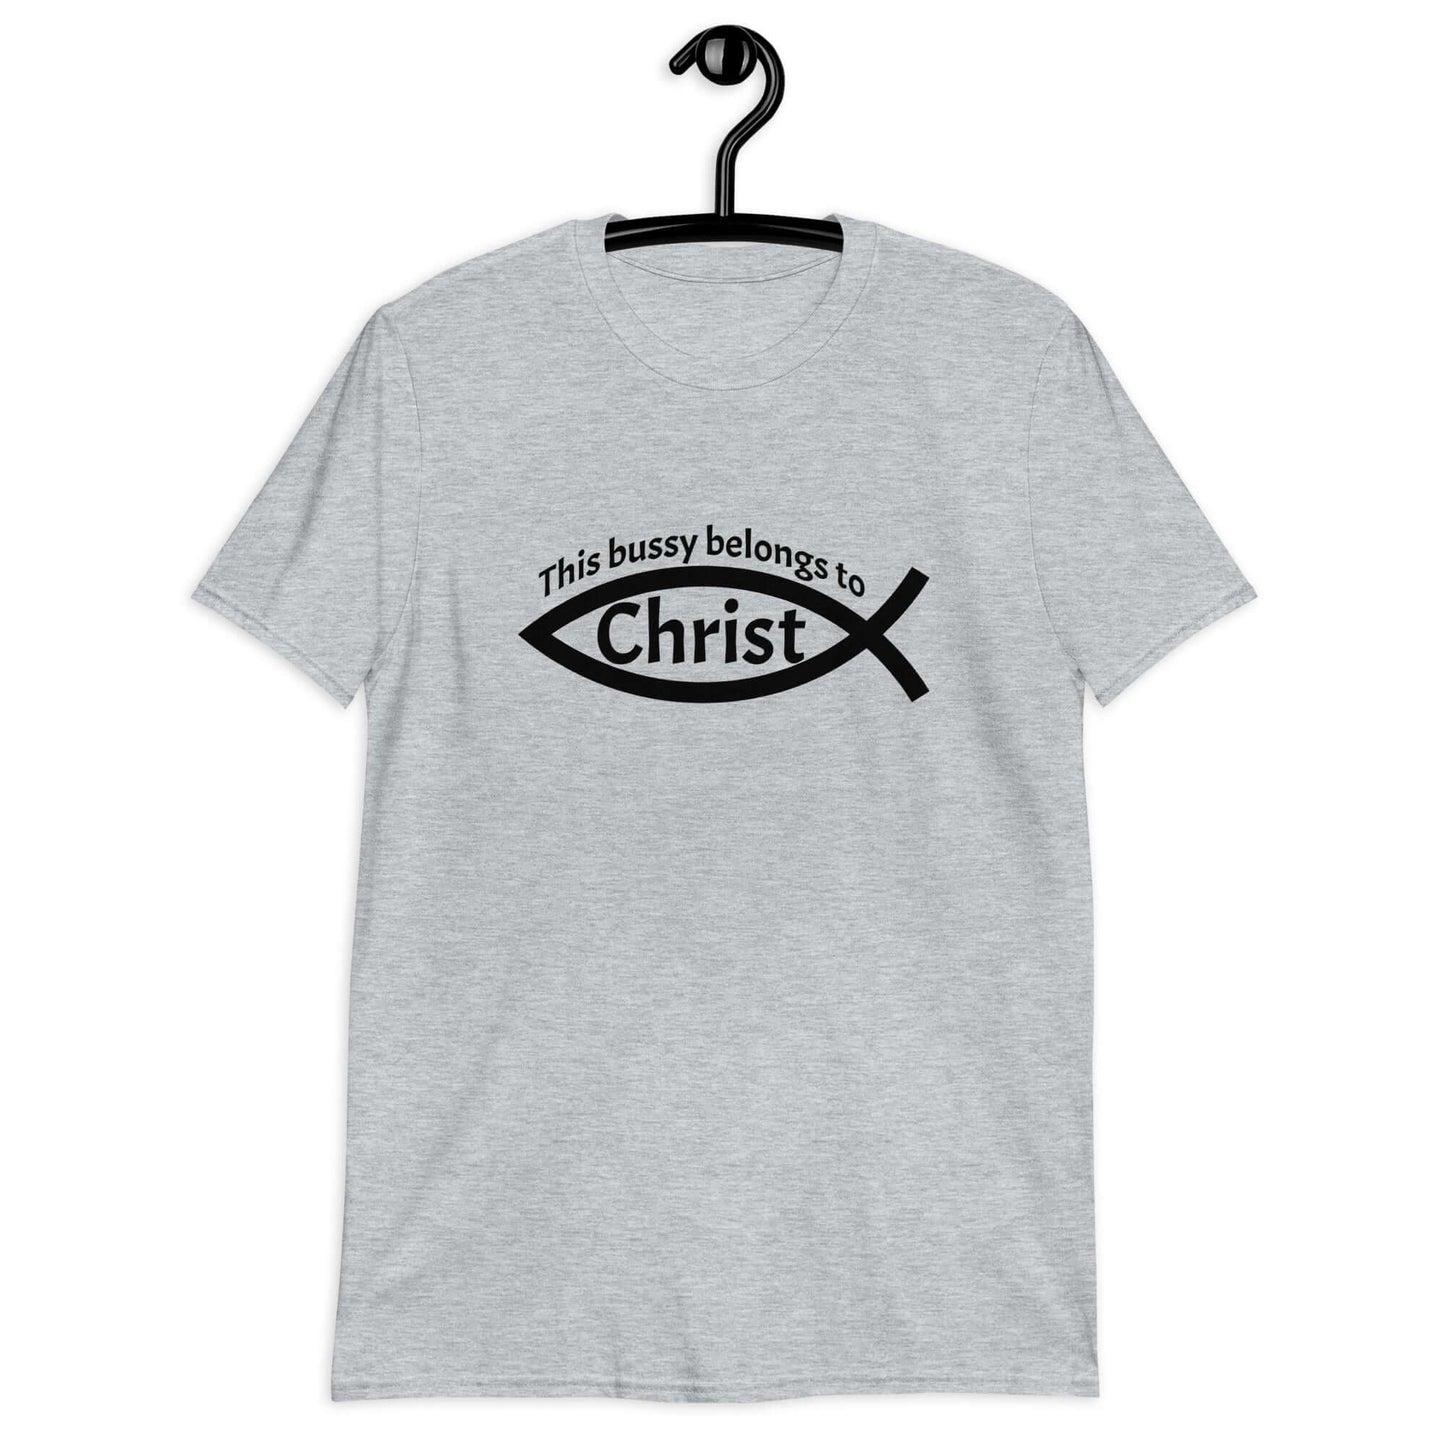 This bussy belongs to Christ T-shirt